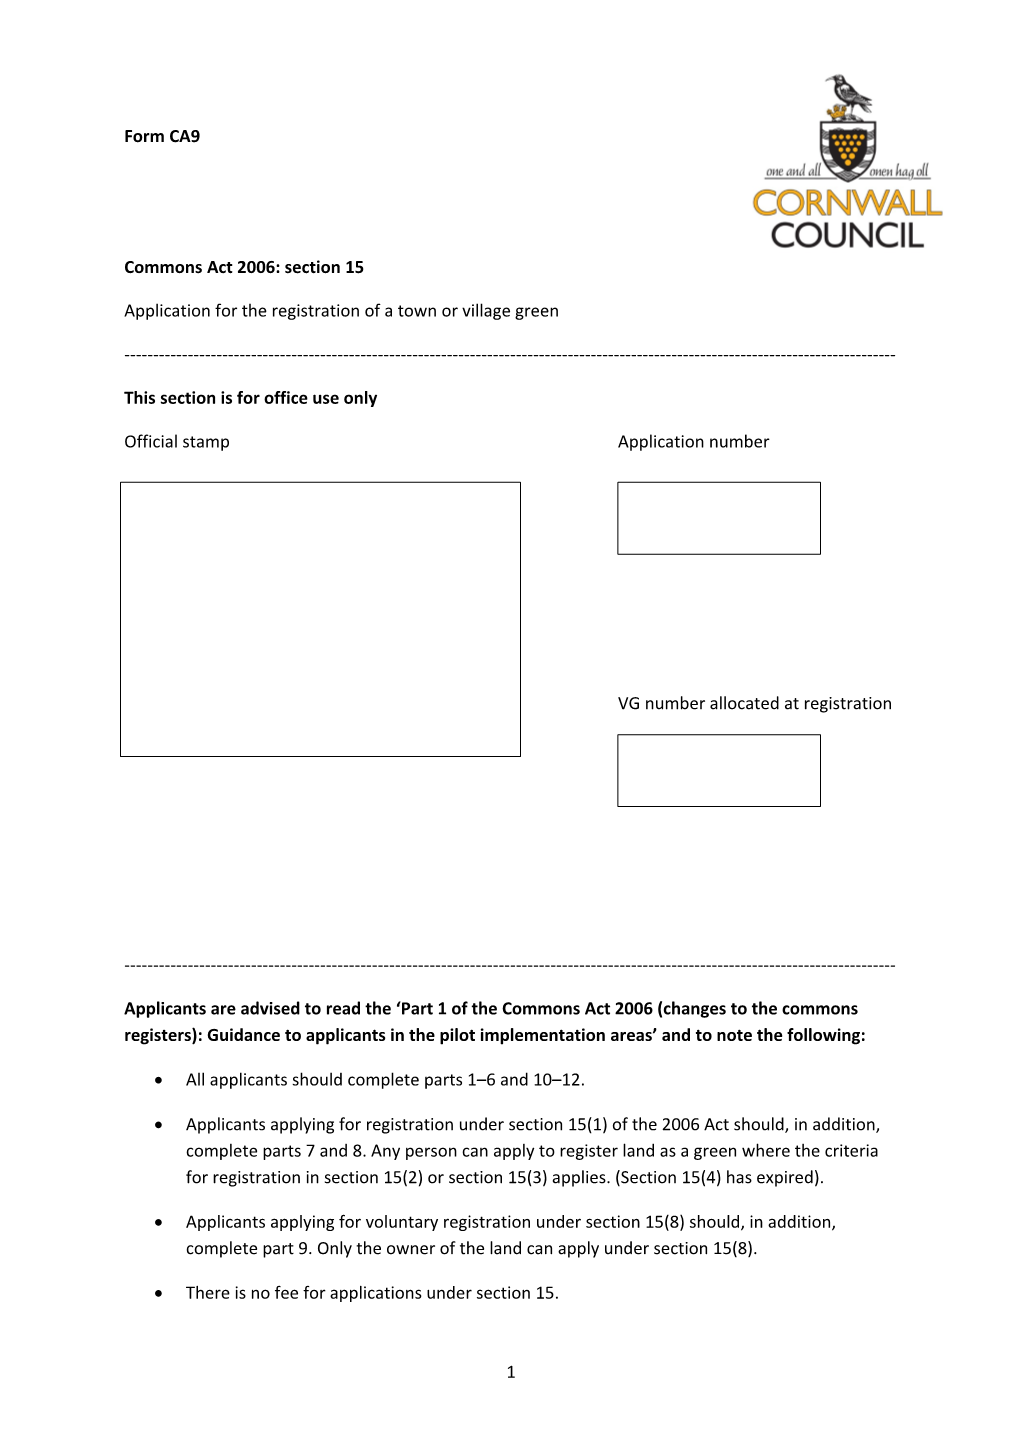 Application for the Registration of a Town Or Village Green